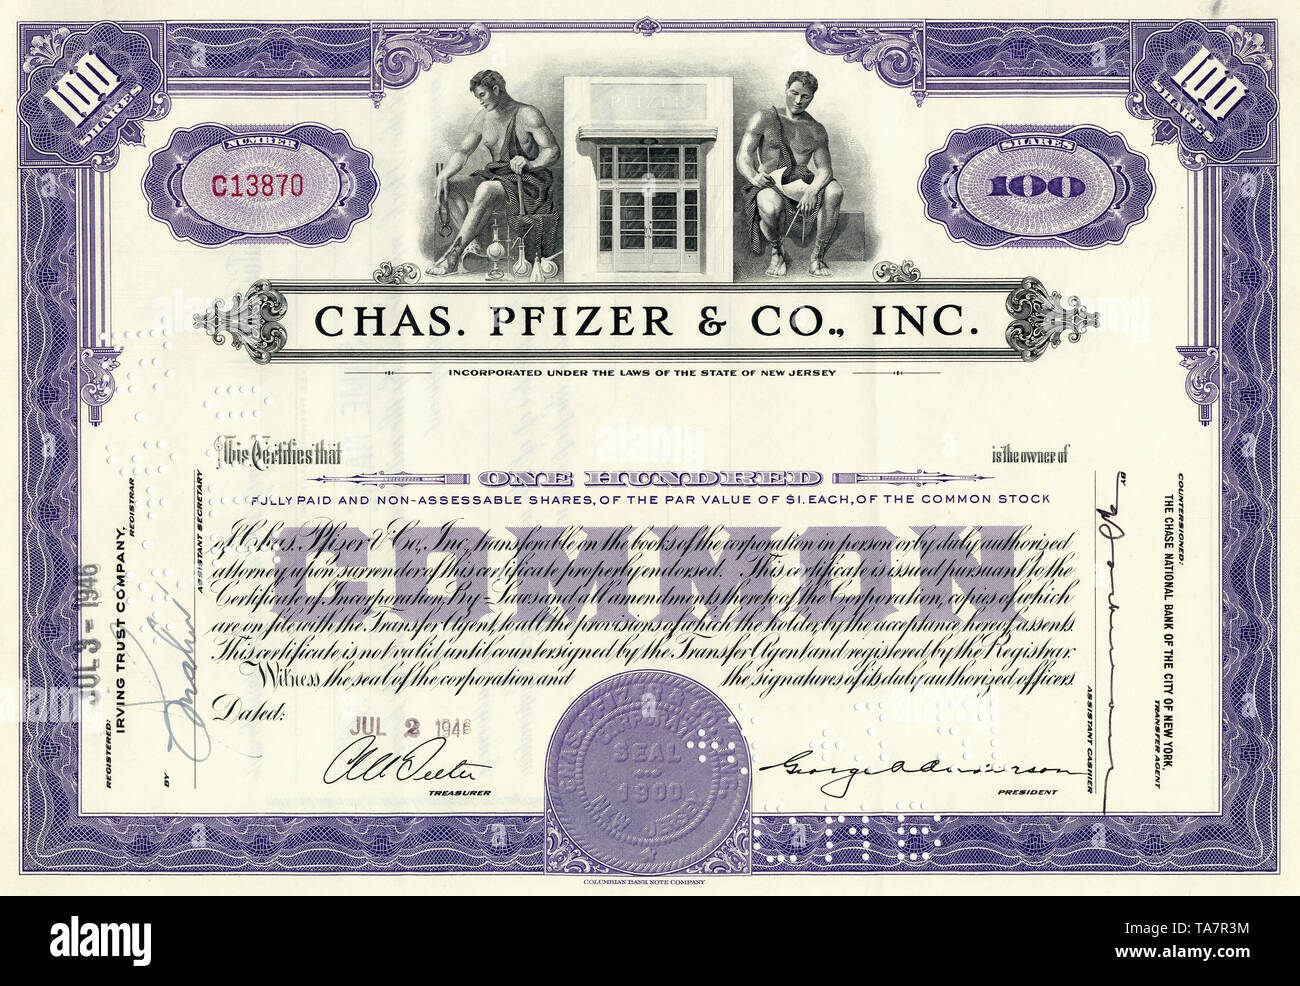 Historical stock certificate of a pharmaceutical company, Chas. Pfizer & Co., Inc., New Jersey, USA, 1946, Wertpapier, historische Aktie, Pharmakonzern, Chas. Pfizer & Co., Inc., 1946, New Jersey, USA Stock Photo